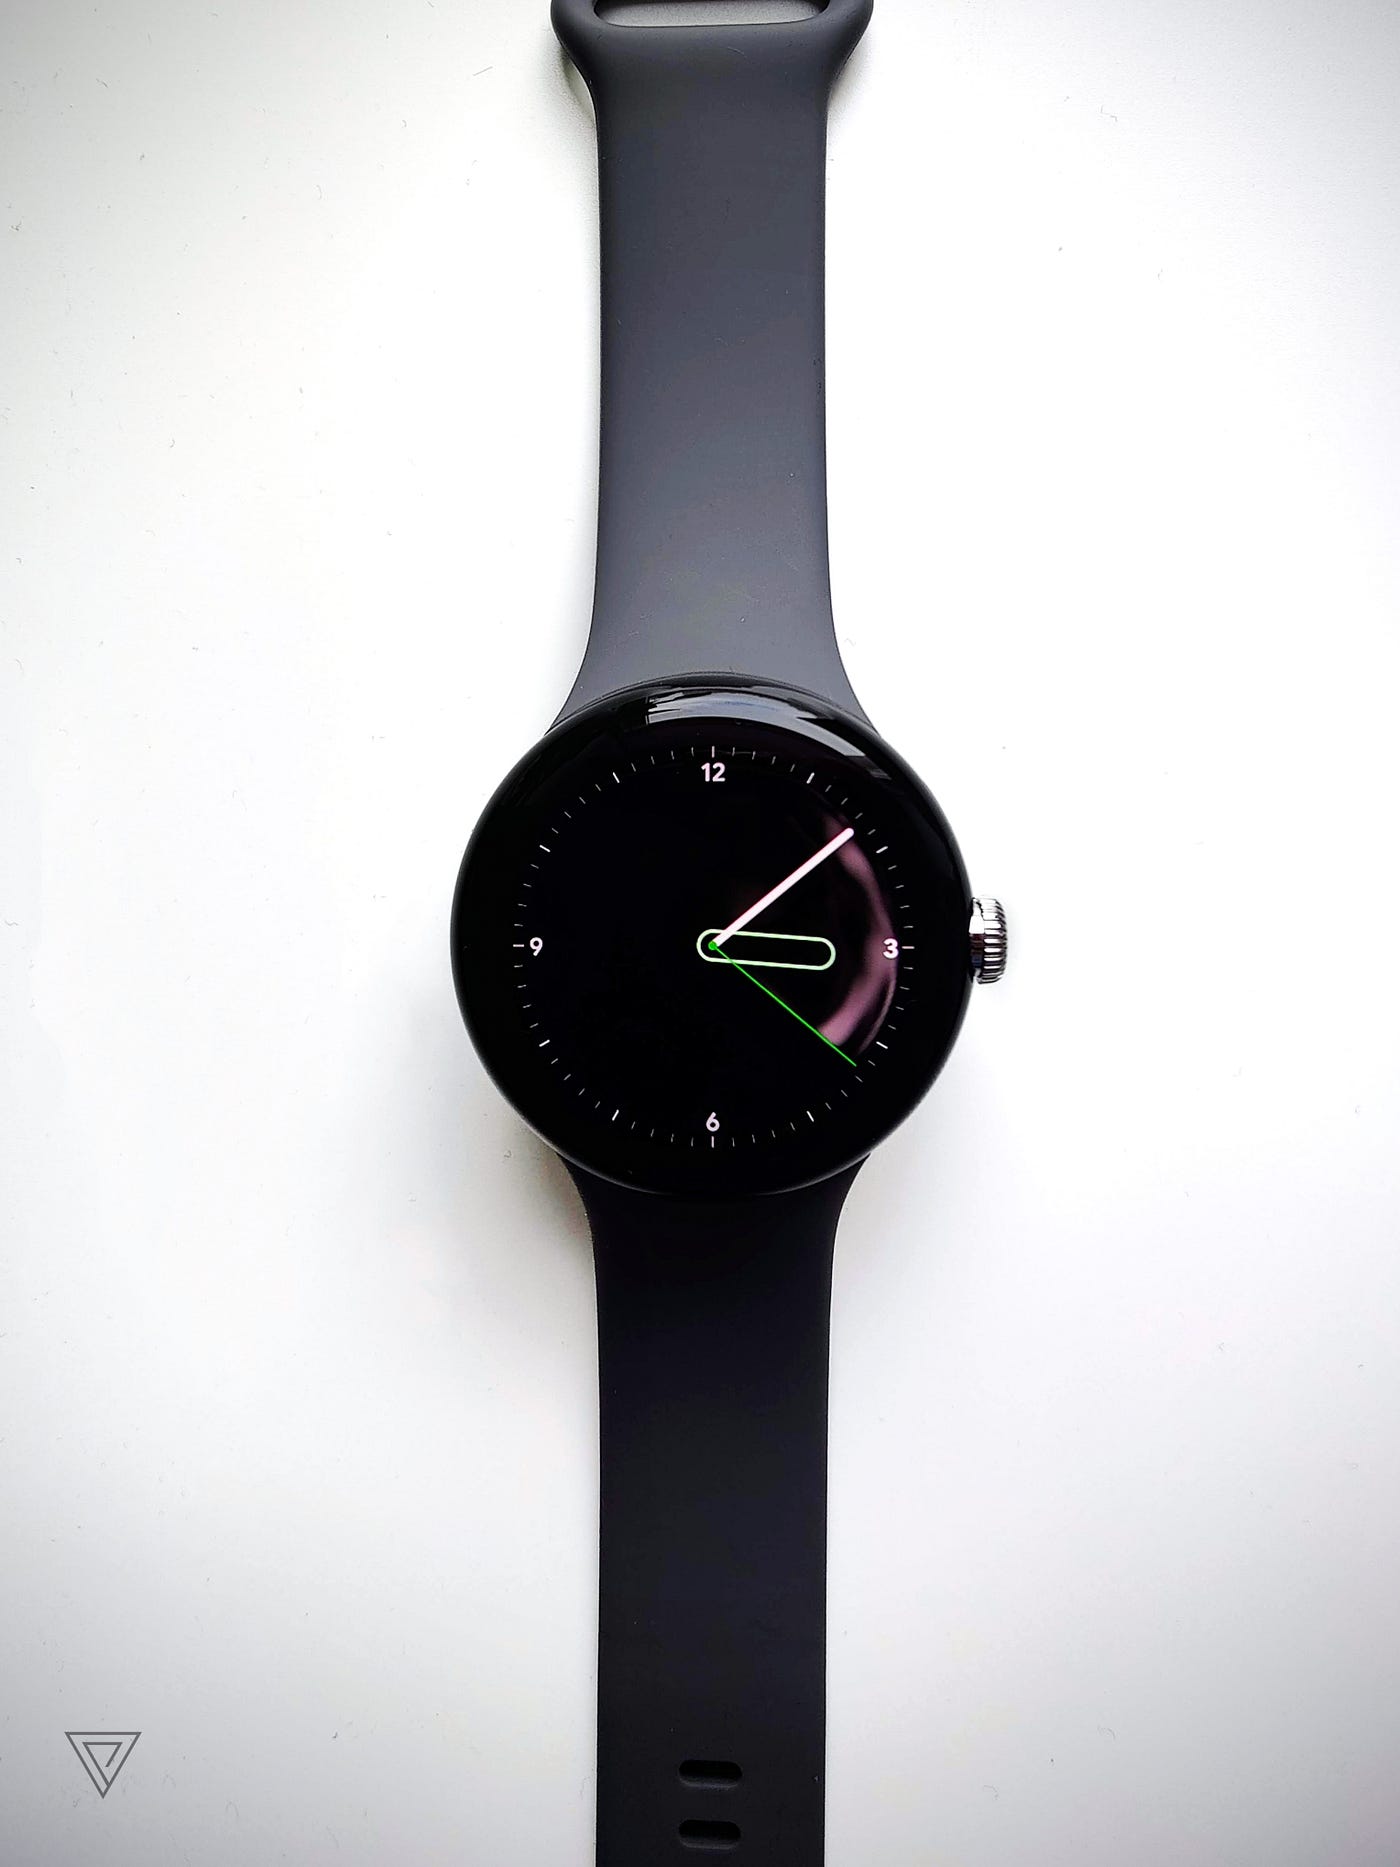 Google Pixel Watch: price, release day, how to buy - The Verge